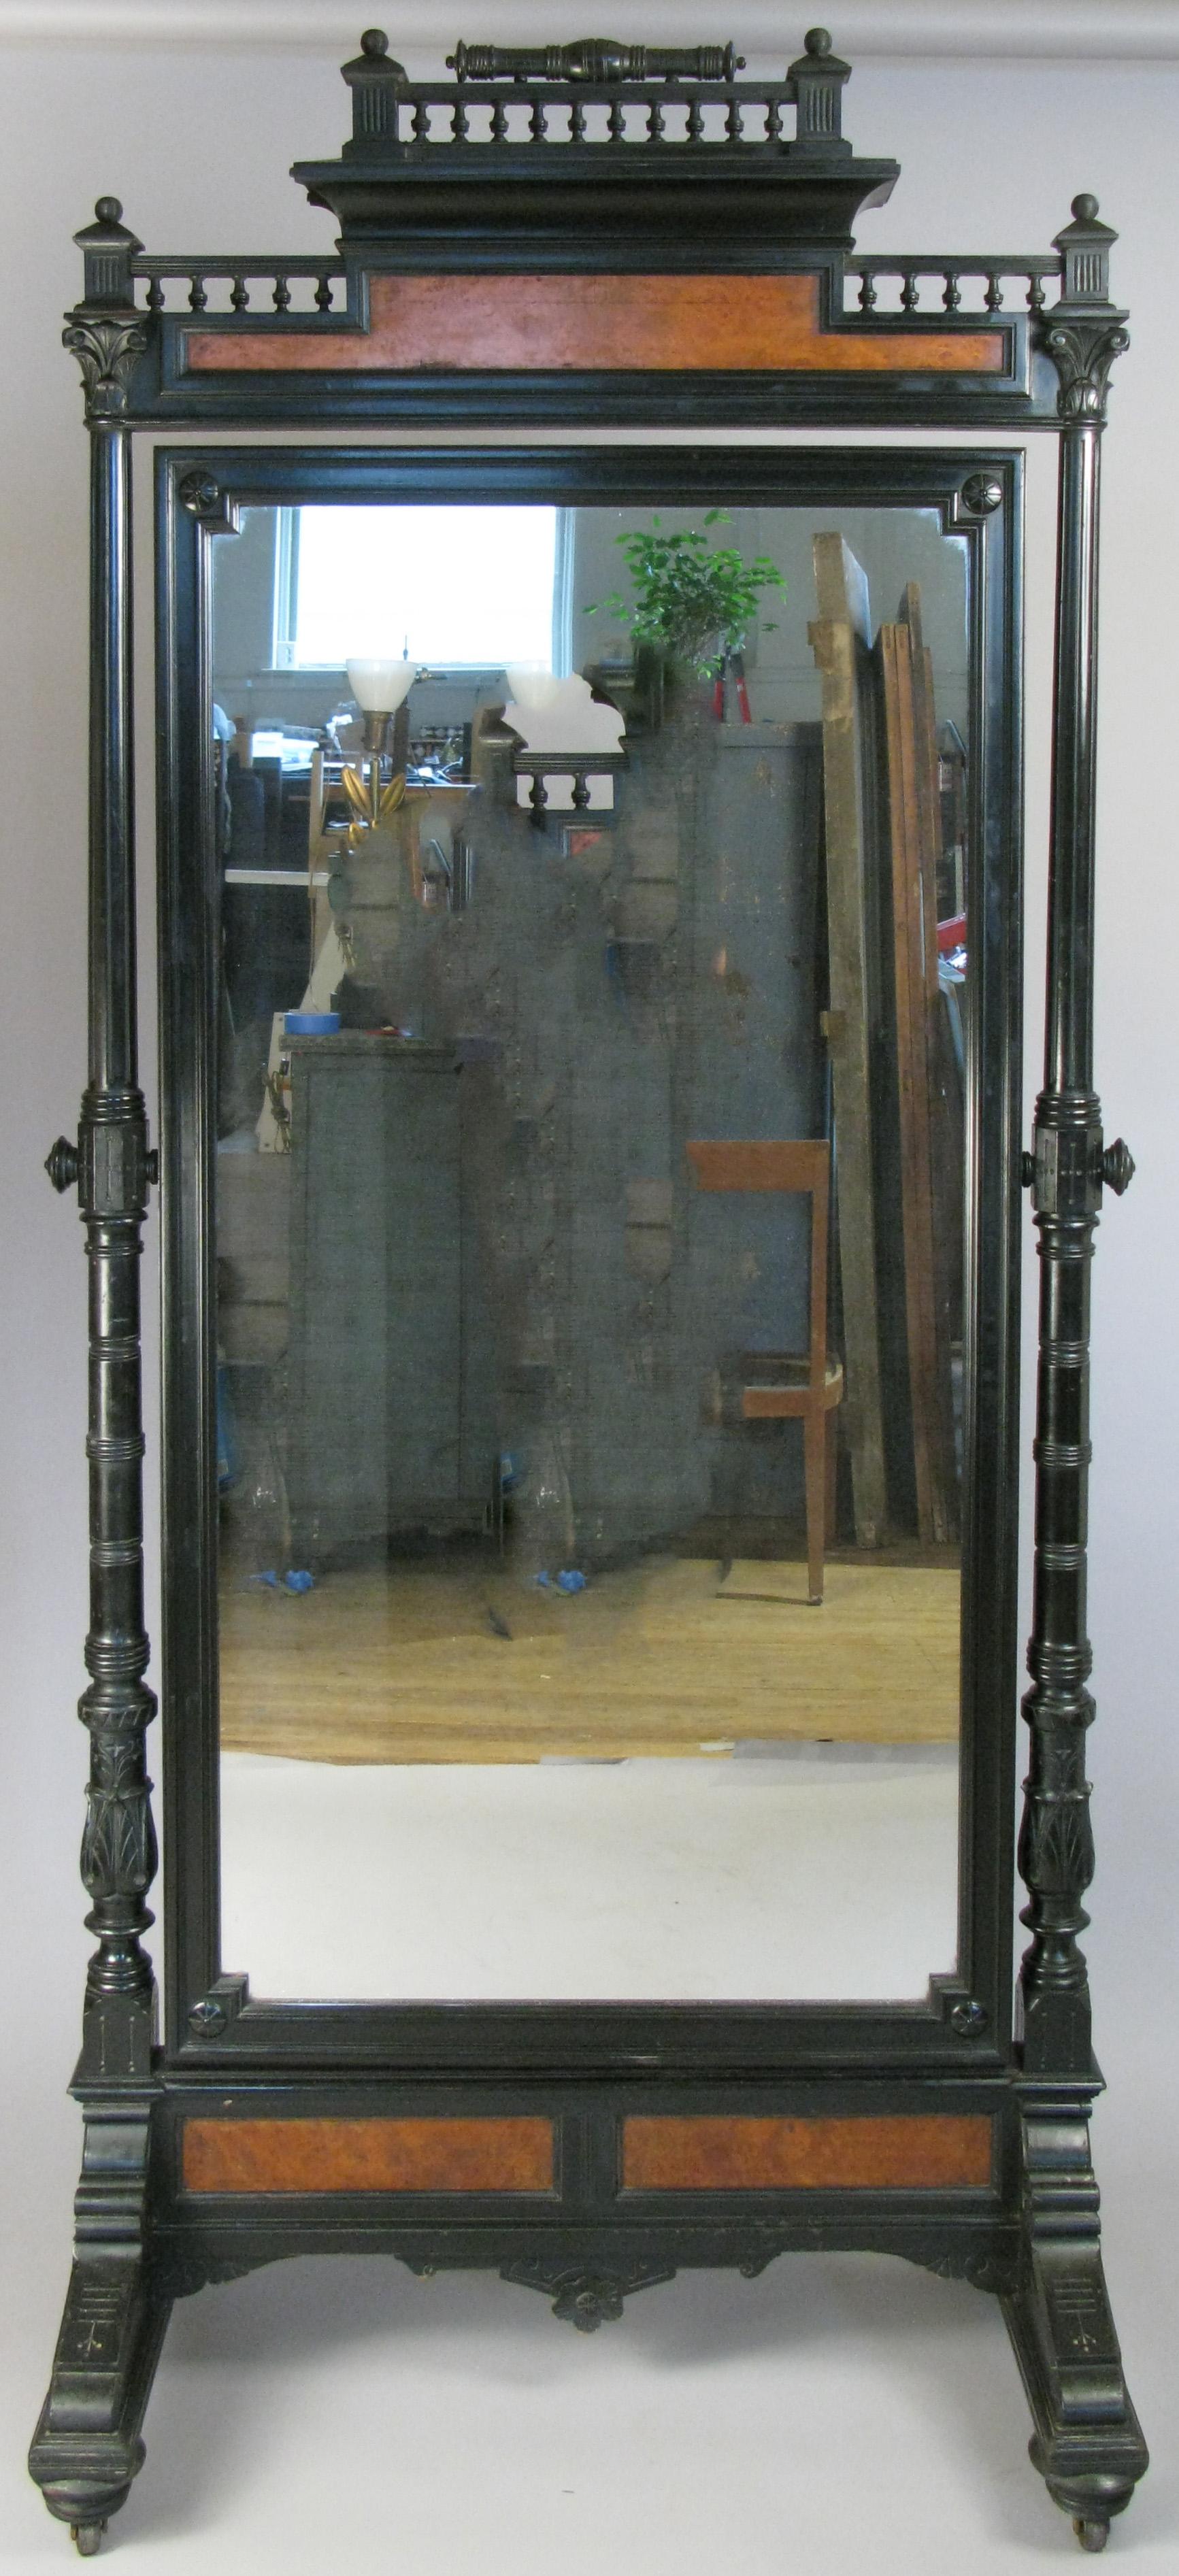 A very handsome 19th century standing cheval mirror, with an ebonized frame and burlwood accents. Beautiful details, design and scale.